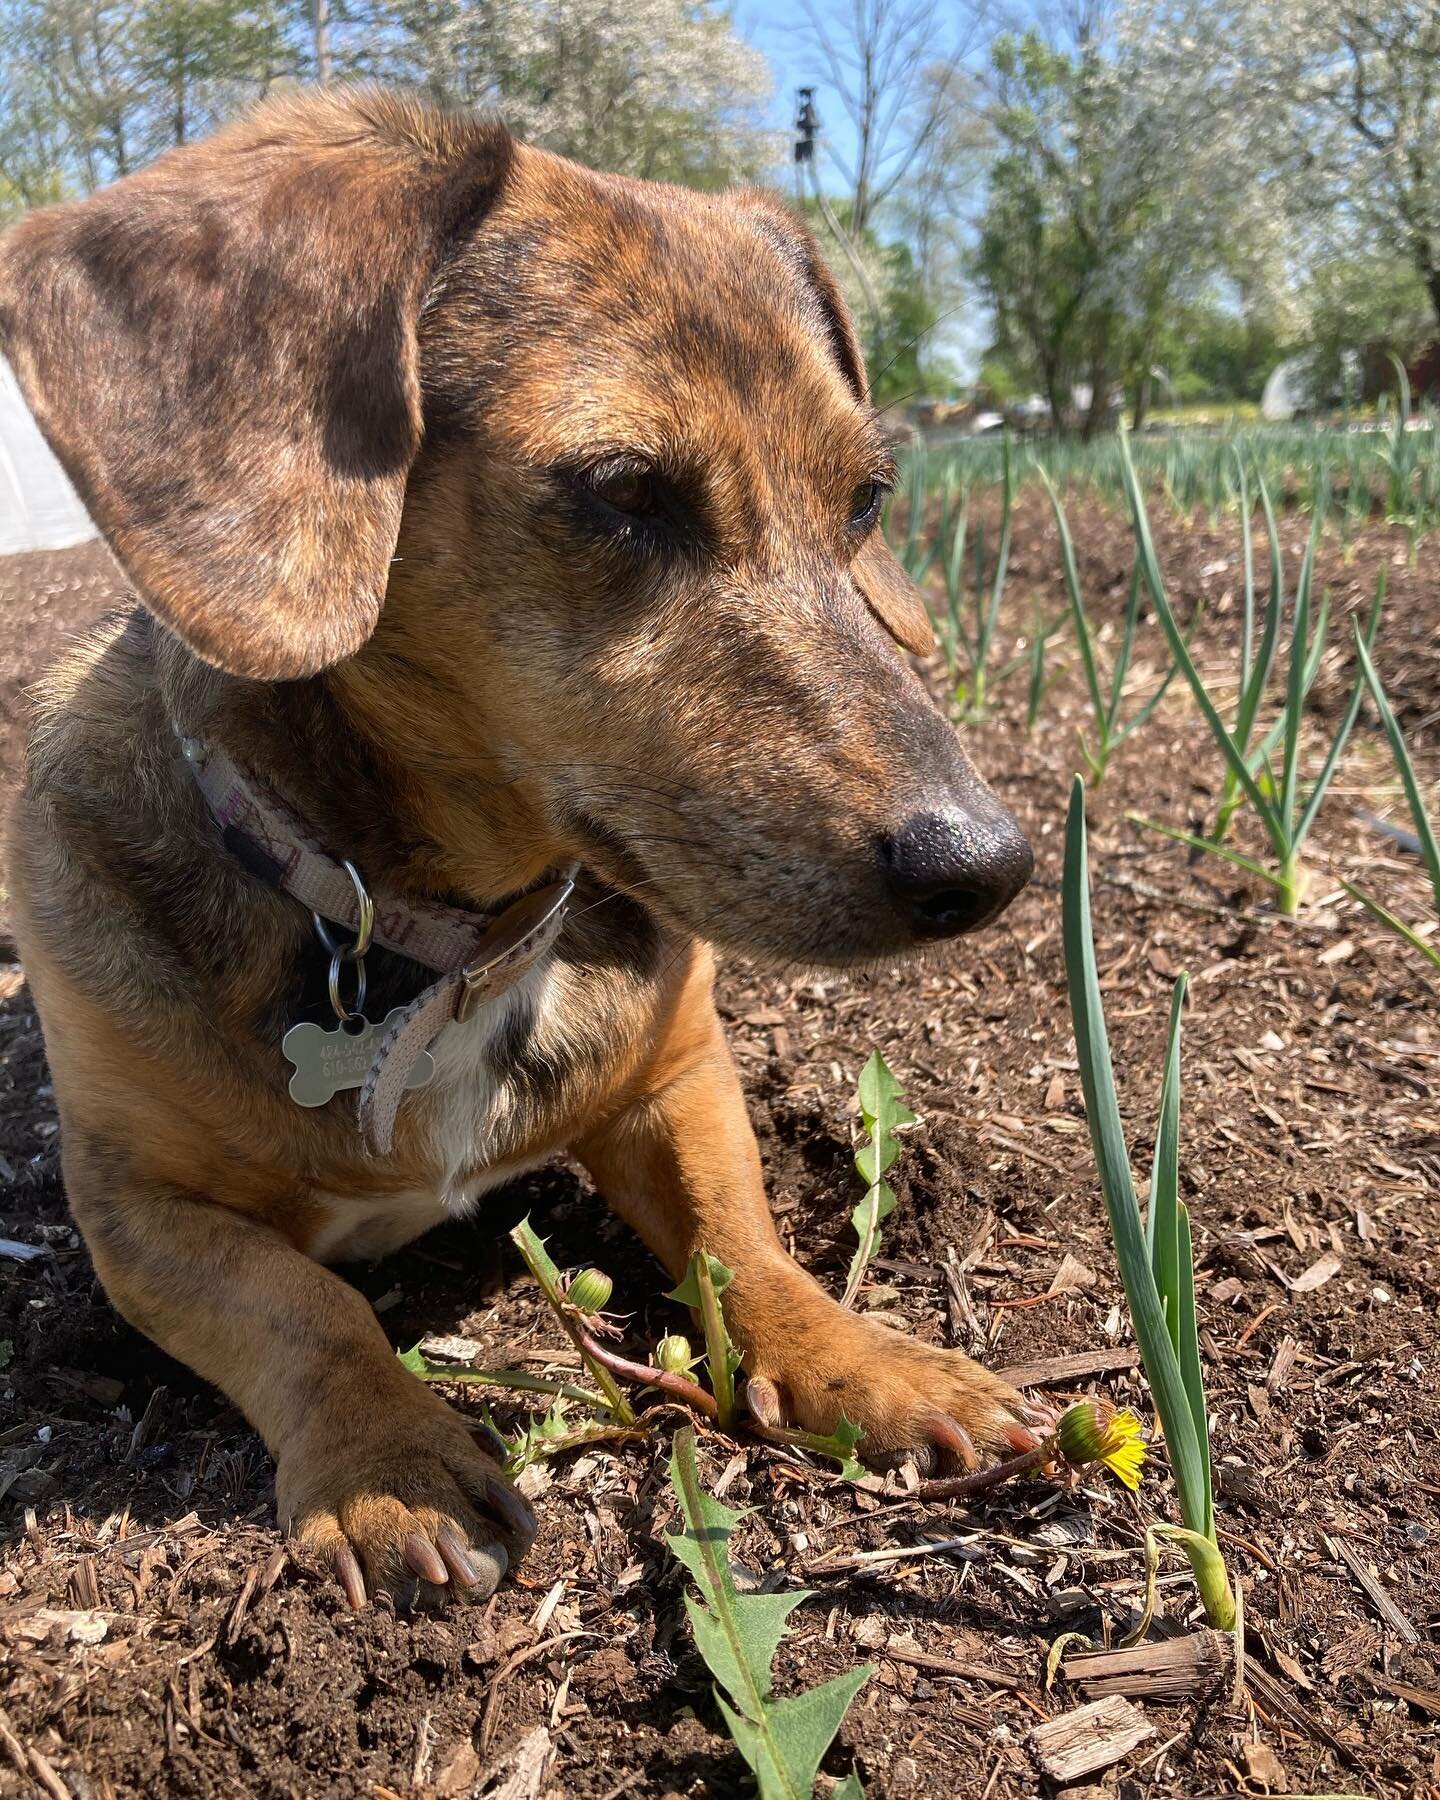 Autumn Mae (the best farm dog ever) wants everyone to know that&rsquo;s there only SEVEN days left to sign up for our 2023 CSA! 

https://www.patriotfarmspa.com/csa-2023

#organic #communitysupportedagriculture #dauschundsofinstagram